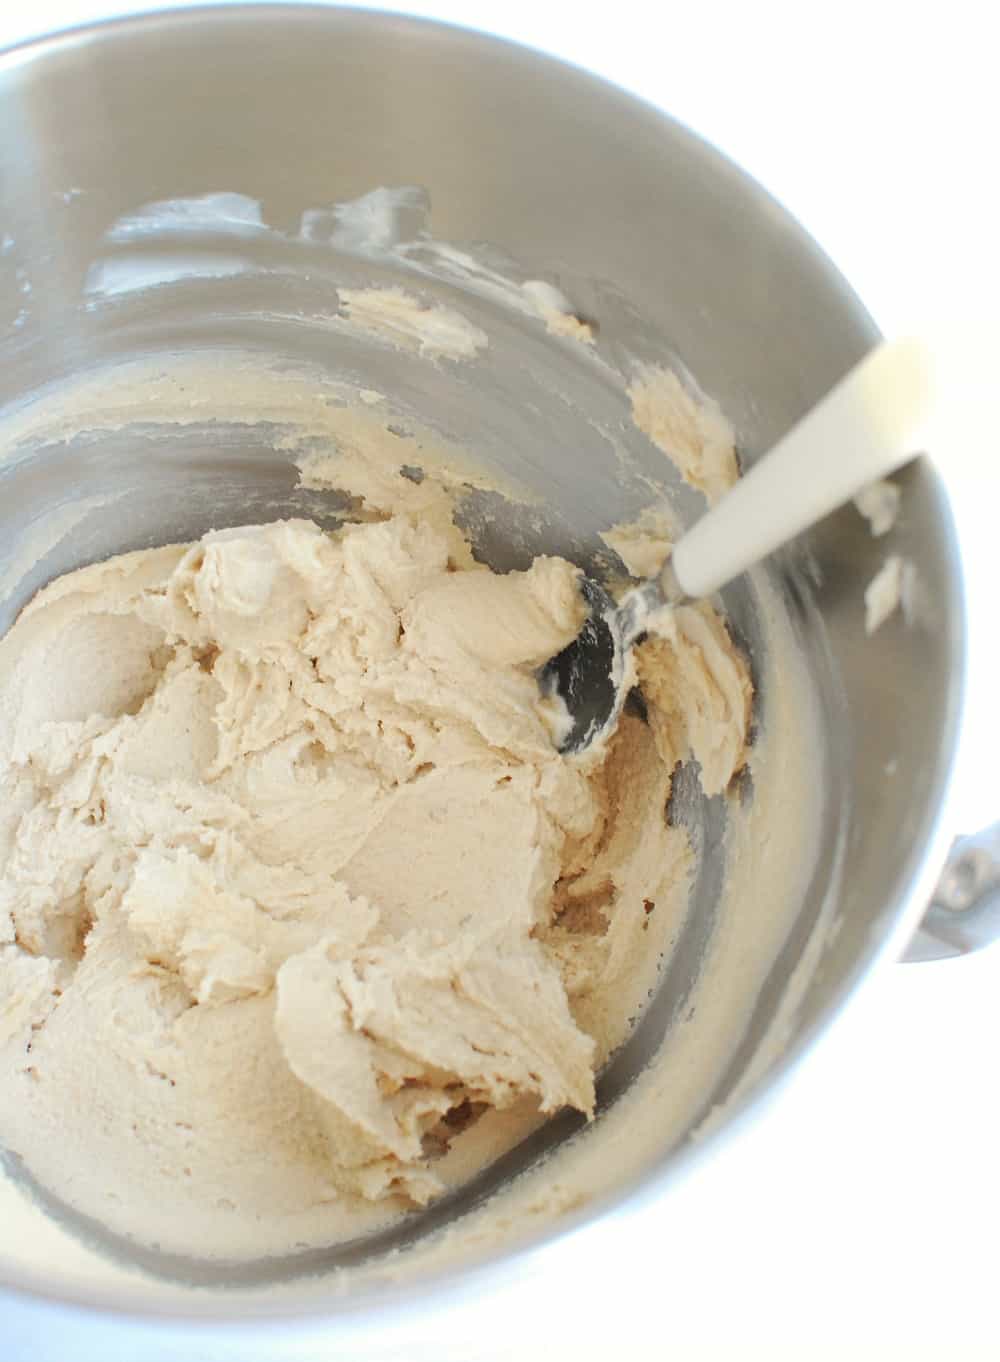 Dairy free butter and sugar creamed together in a mixing bowl.